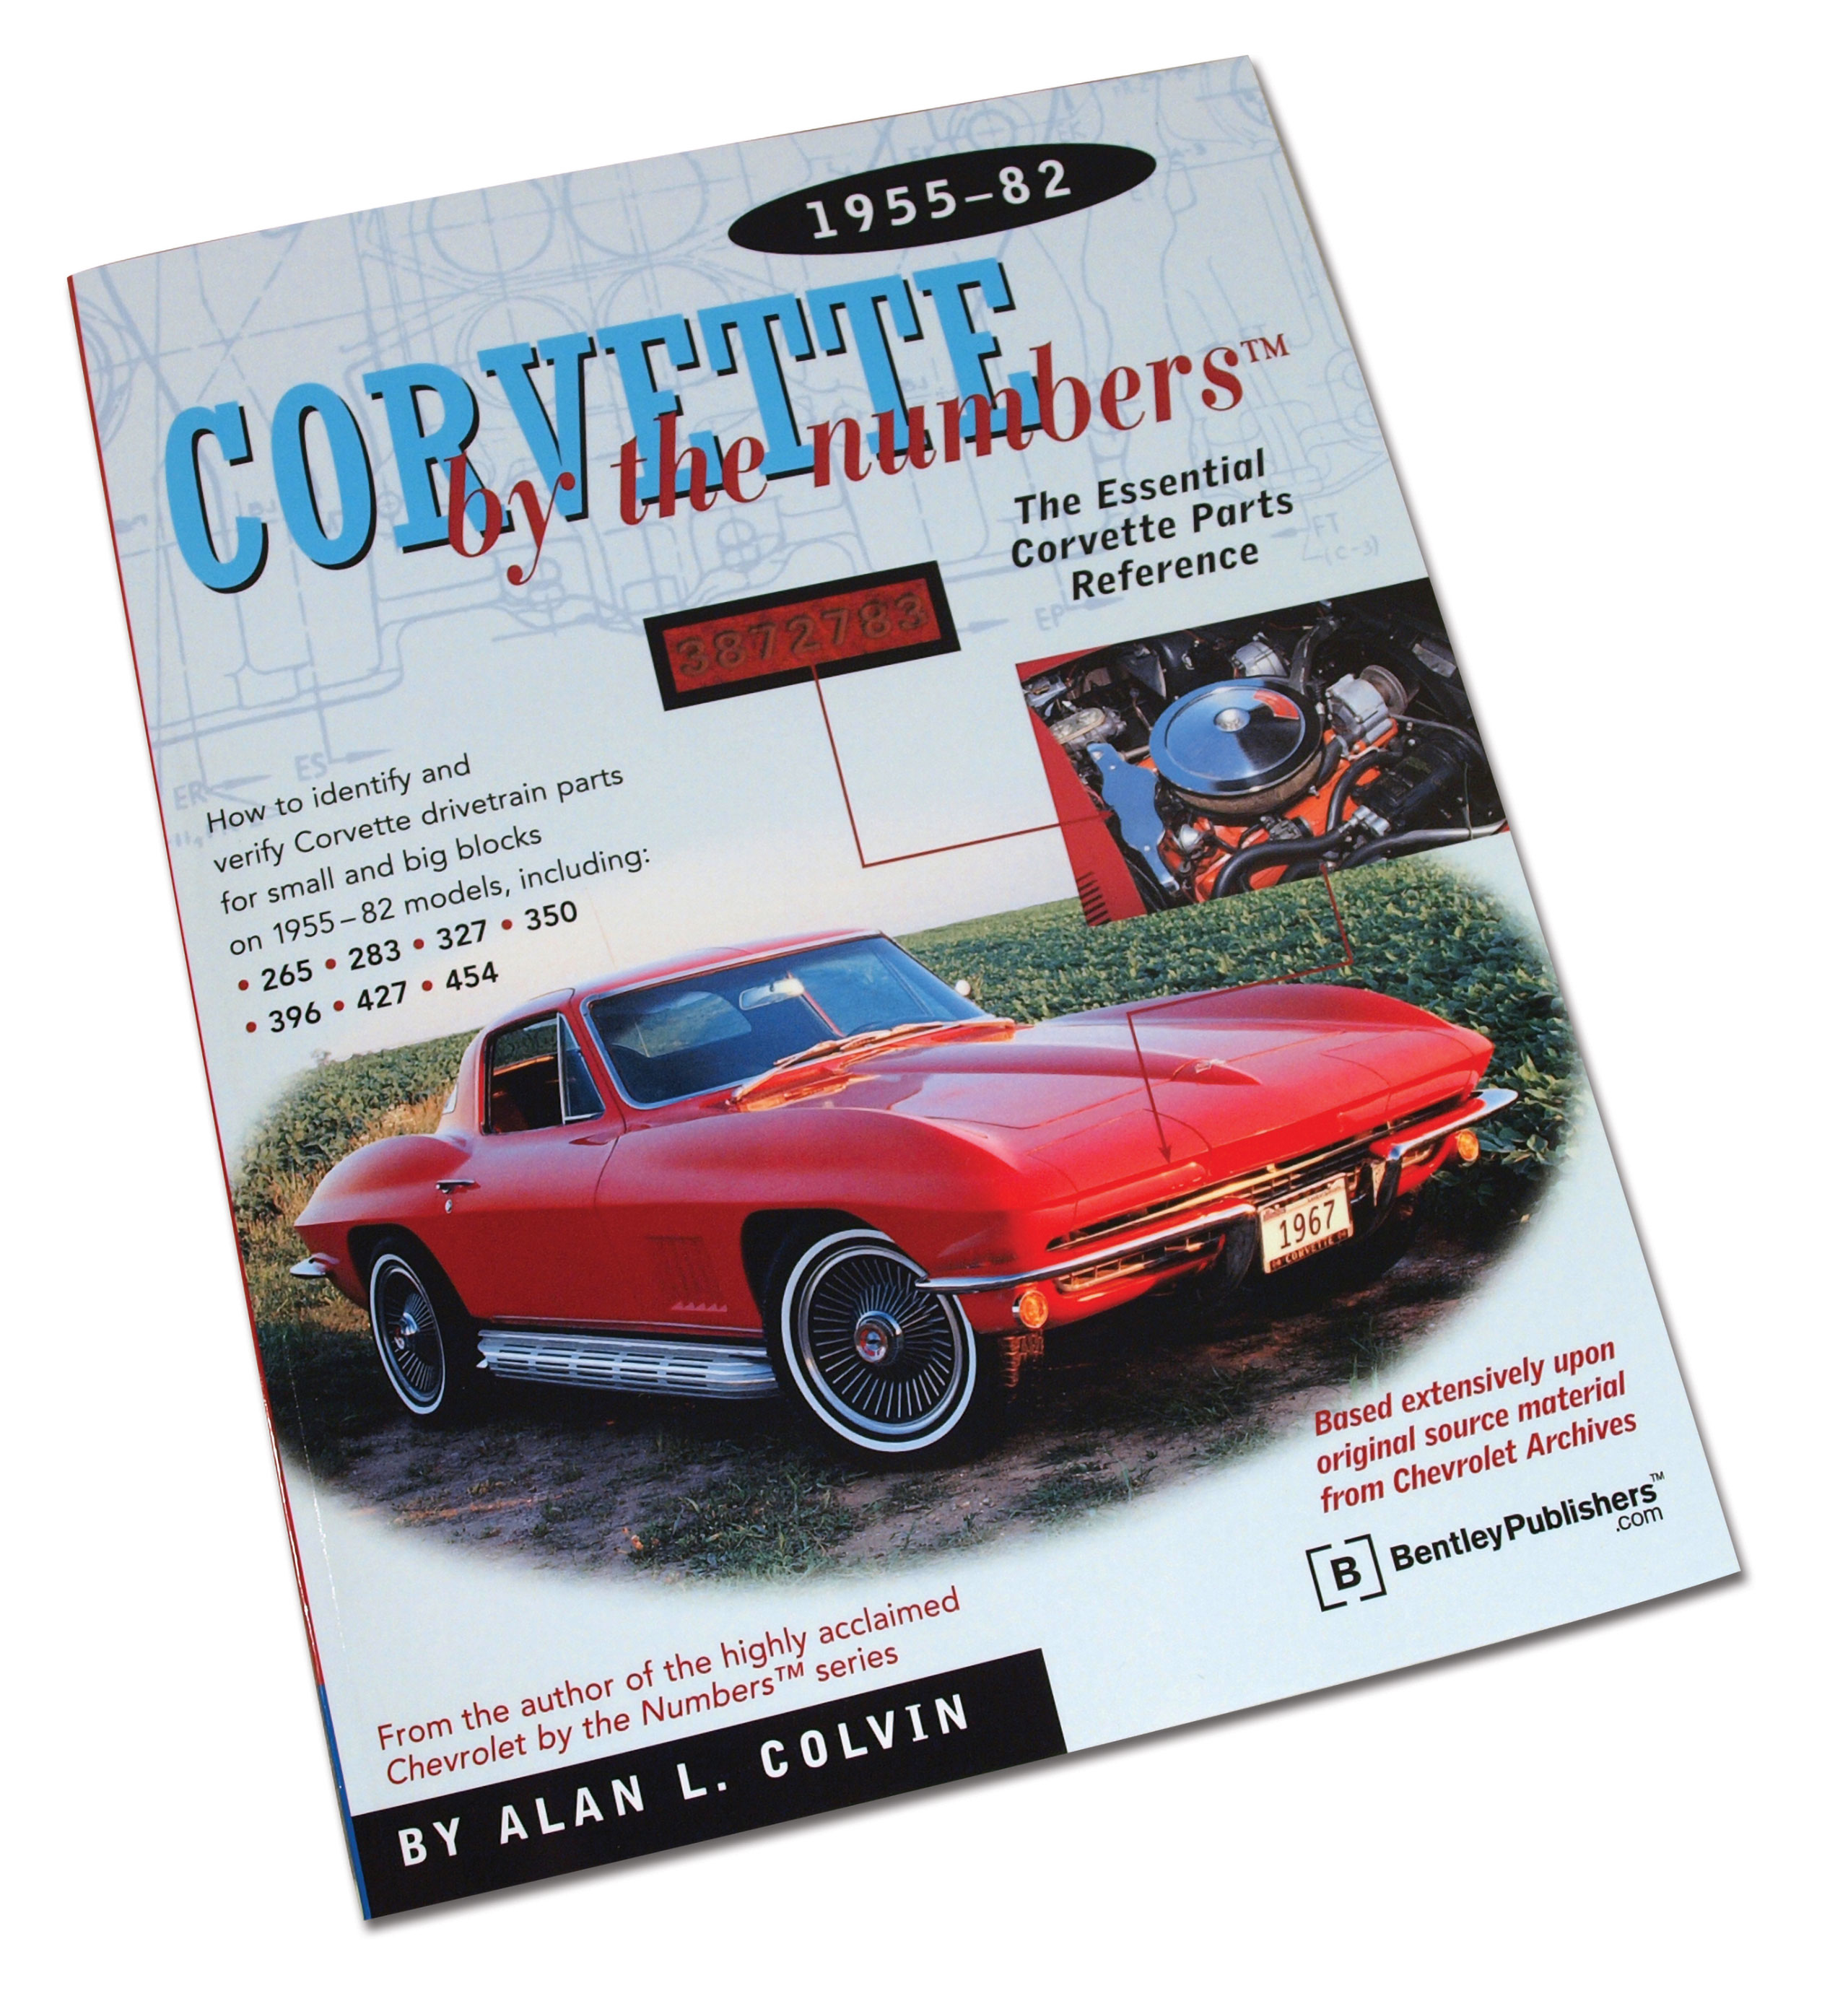 Book- Corvette By The Numbers 55-82 For 1955-1982 Corvette